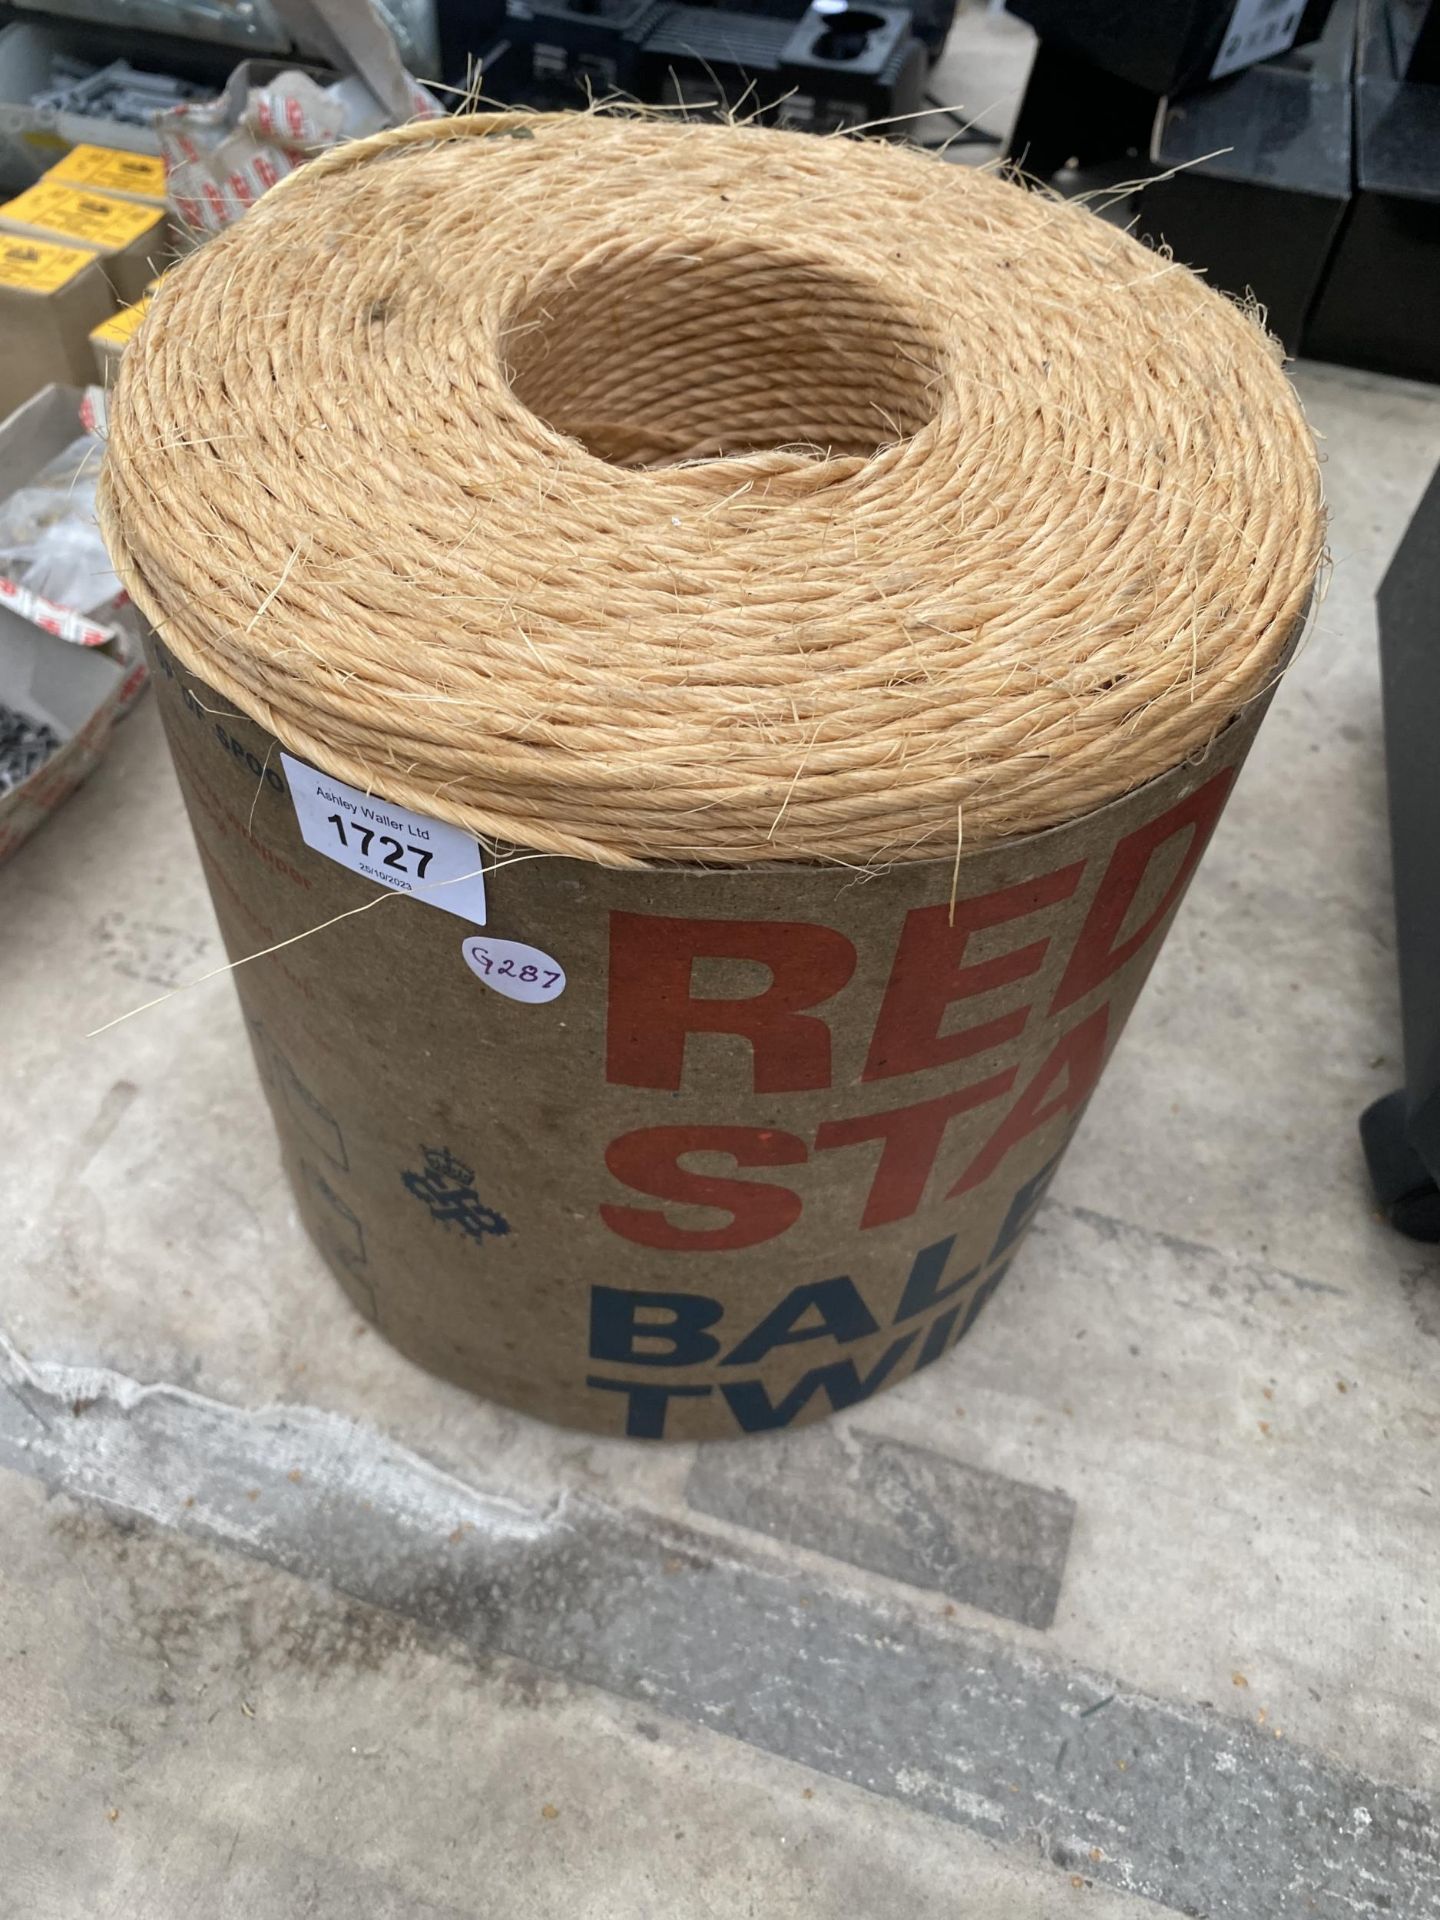 A ROLL OF RED STAR HESIAN BALER TWINE